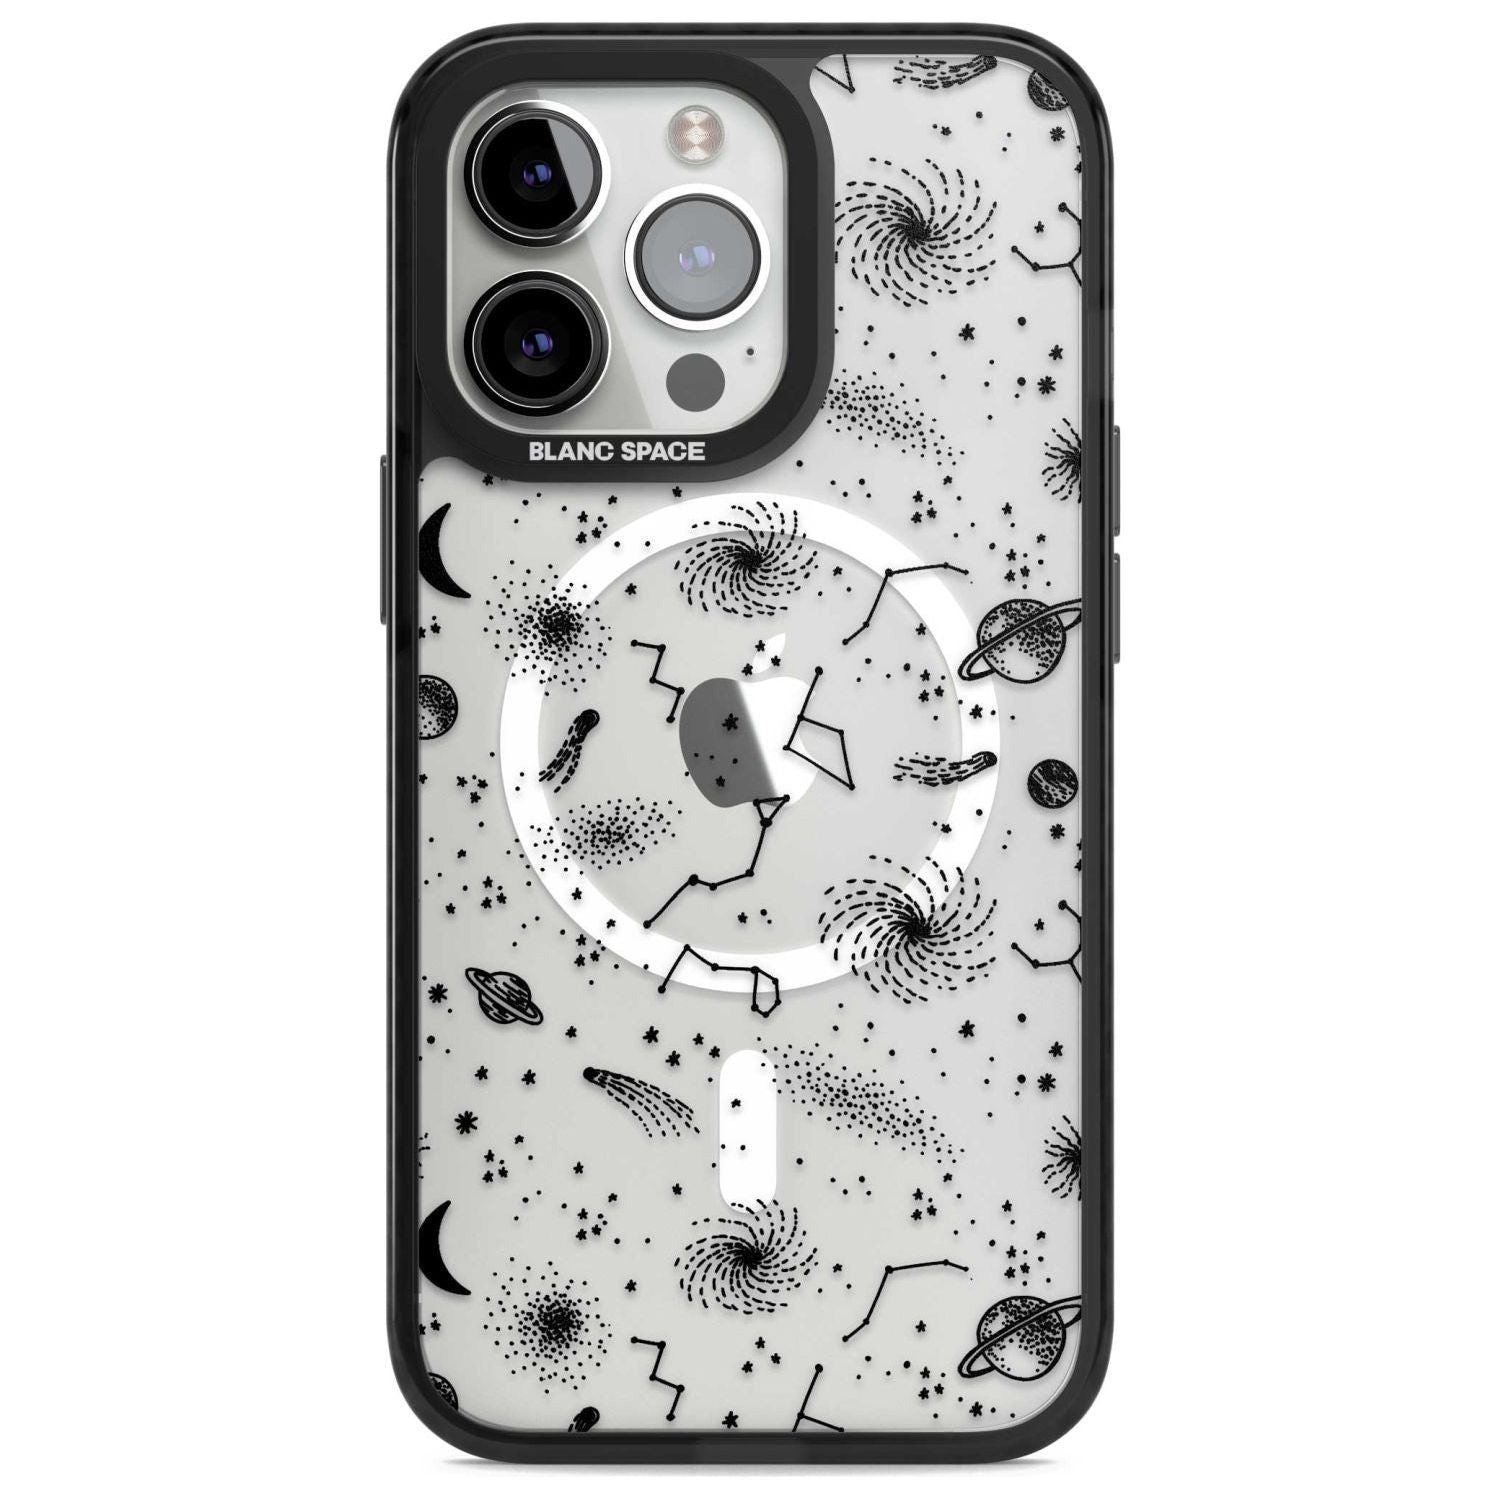 Mixed Galaxy Pattern Phone Case iPhone 15 Pro Max / Magsafe Black Impact Case,iPhone 15 Pro / Magsafe Black Impact Case,iPhone 14 Pro Max / Magsafe Black Impact Case,iPhone 14 Pro / Magsafe Black Impact Case,iPhone 13 Pro / Magsafe Black Impact Case Blanc Space